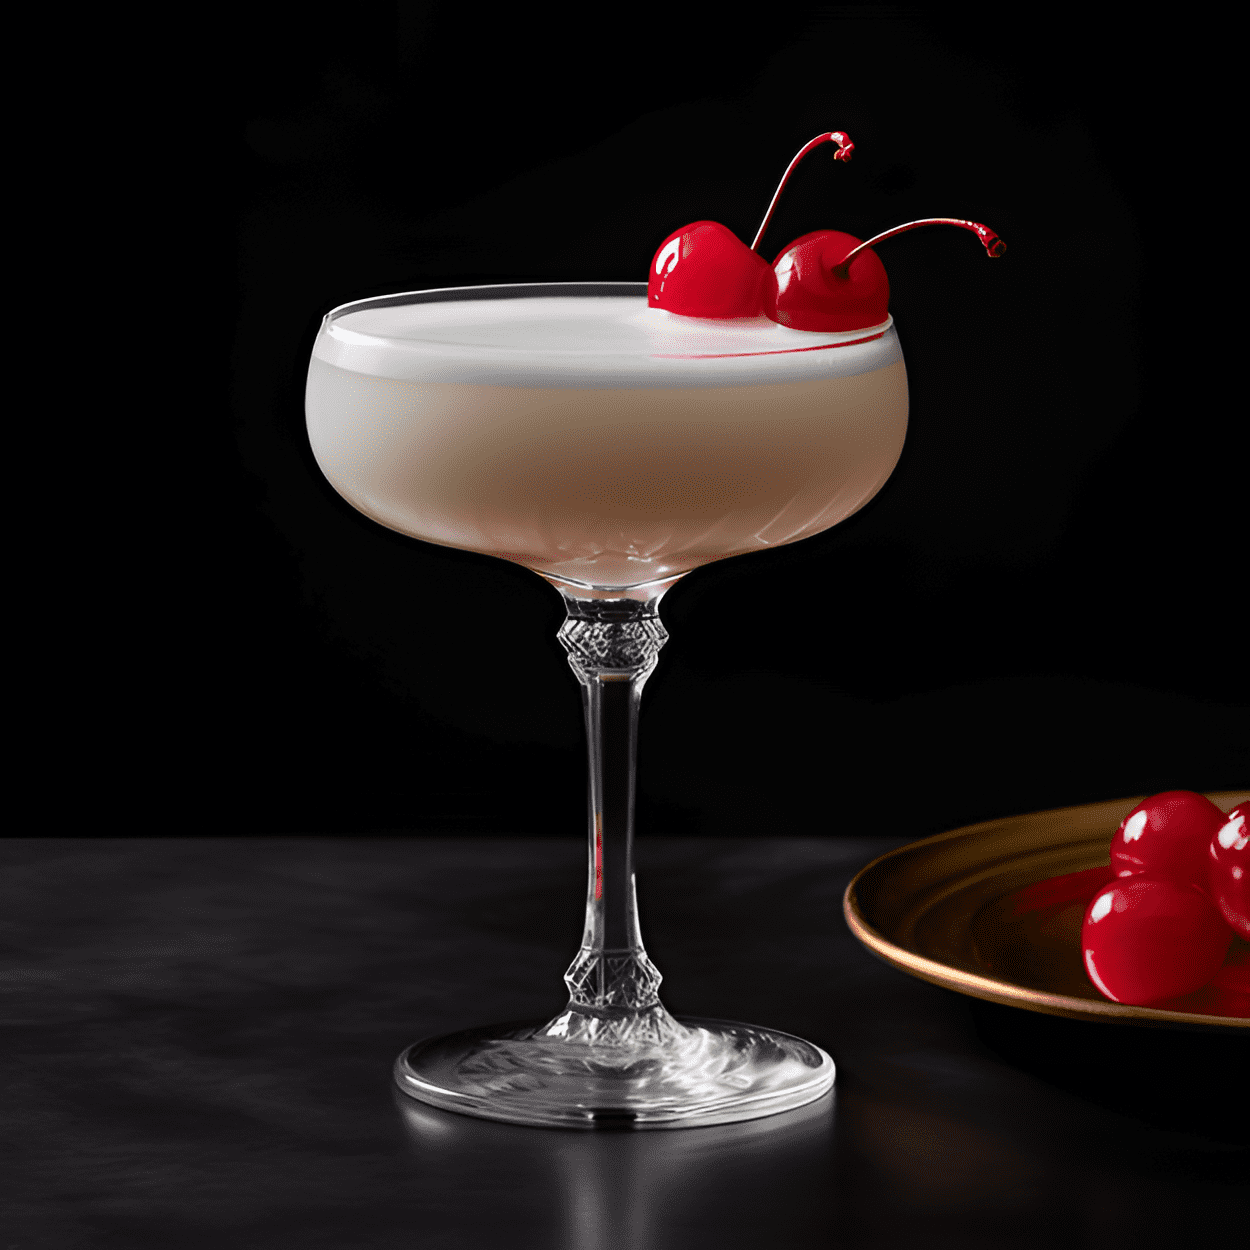 Grappa Sour Cocktail Recipe - The Grappa Sour is a complex and robust cocktail. It has the strong, fiery taste of Grappa, balanced by the tartness of fresh lemon juice and the sweetness of simple syrup. The egg white adds a creamy, frothy texture that softens the overall flavor and makes it more palatable.